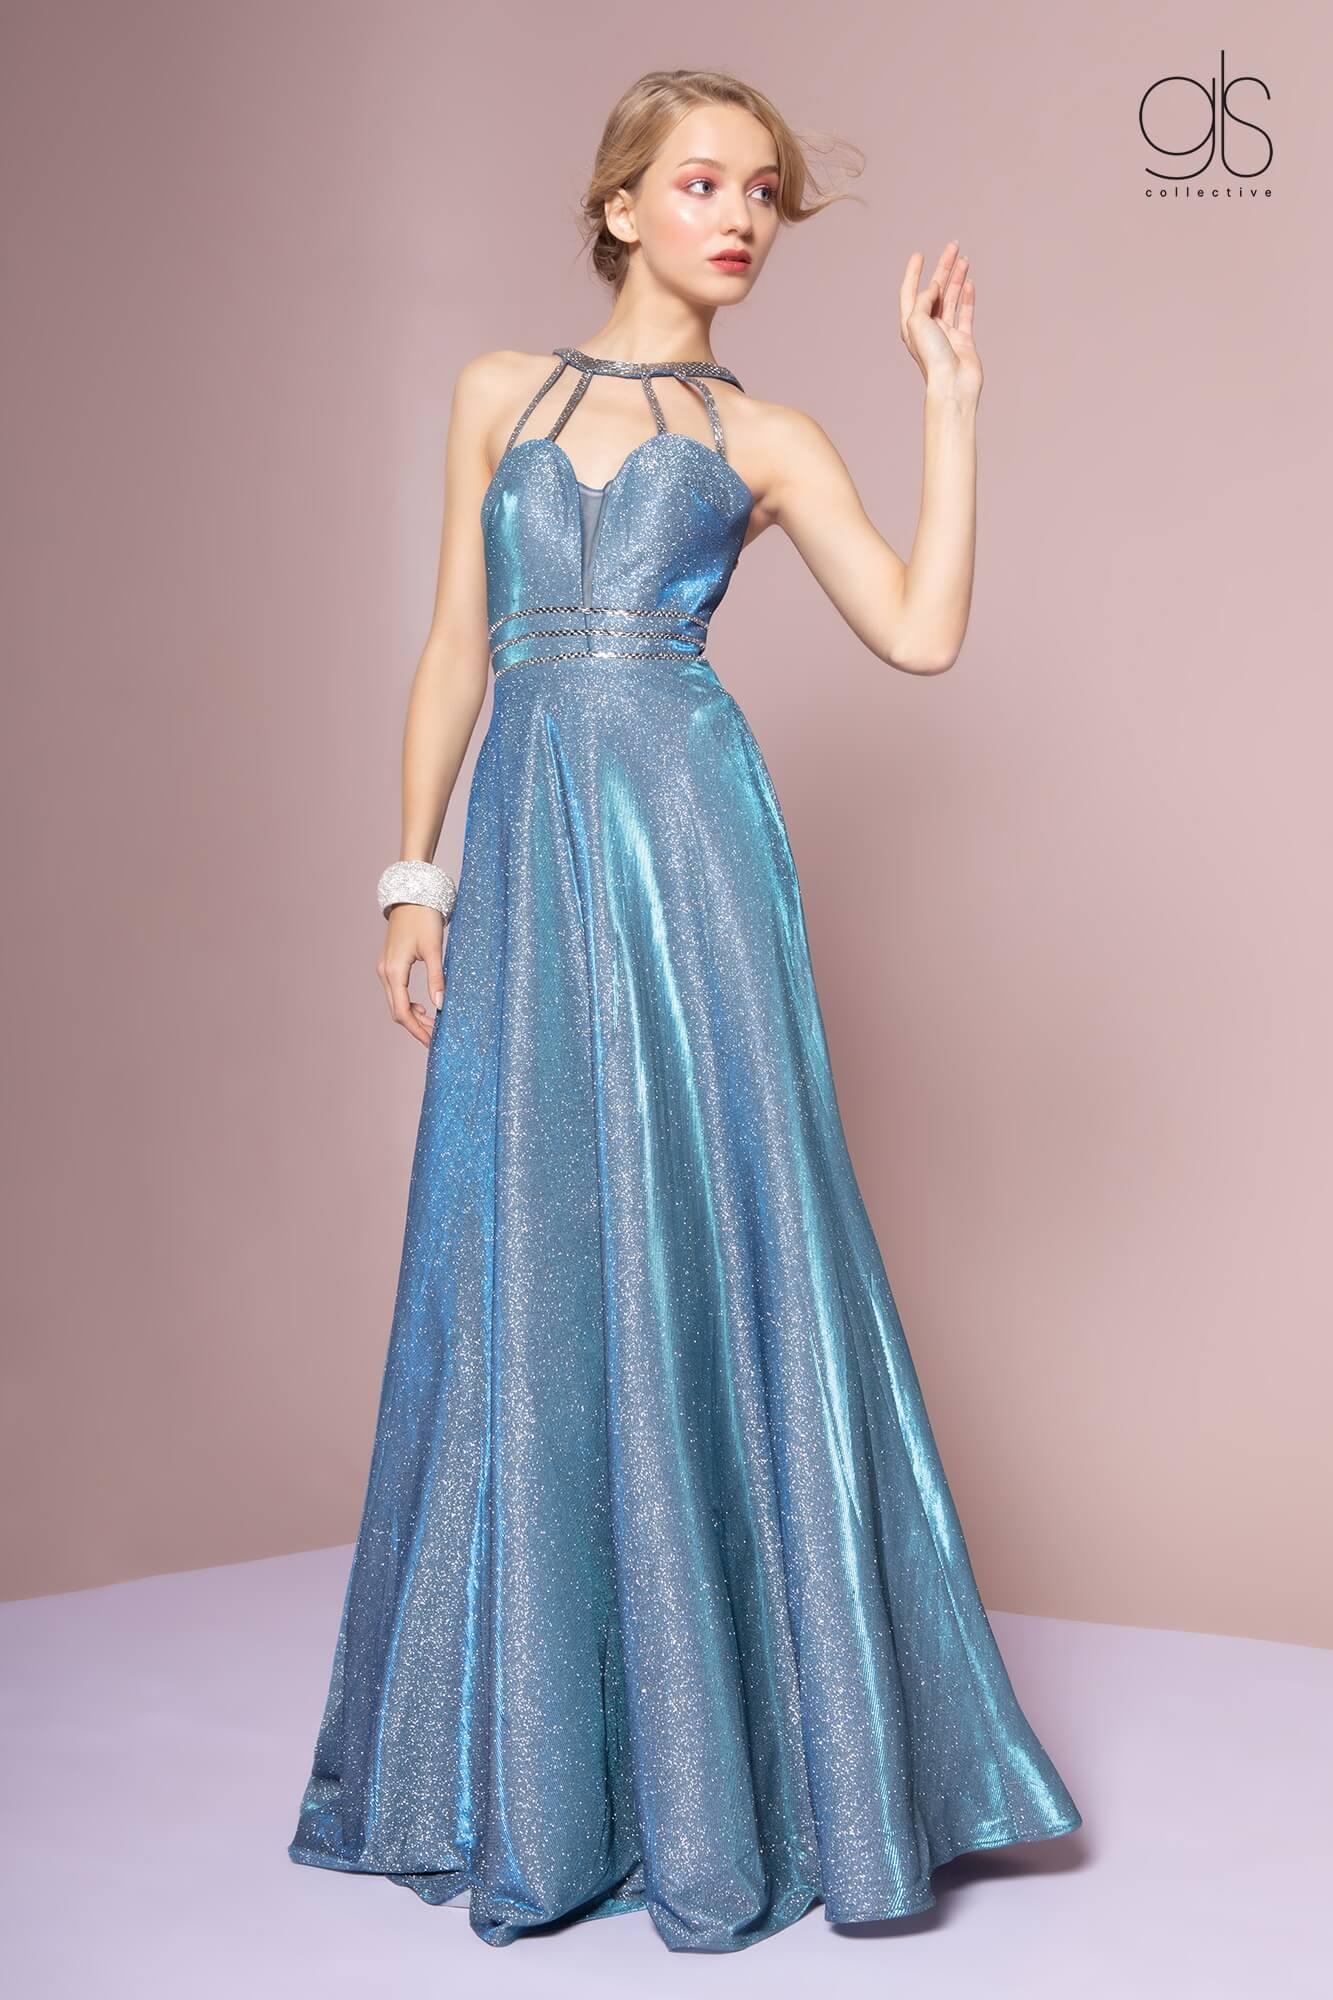 Sexy Long Evening Dress Prom Metallic Gown - The Dress Outlet Elizabeth K